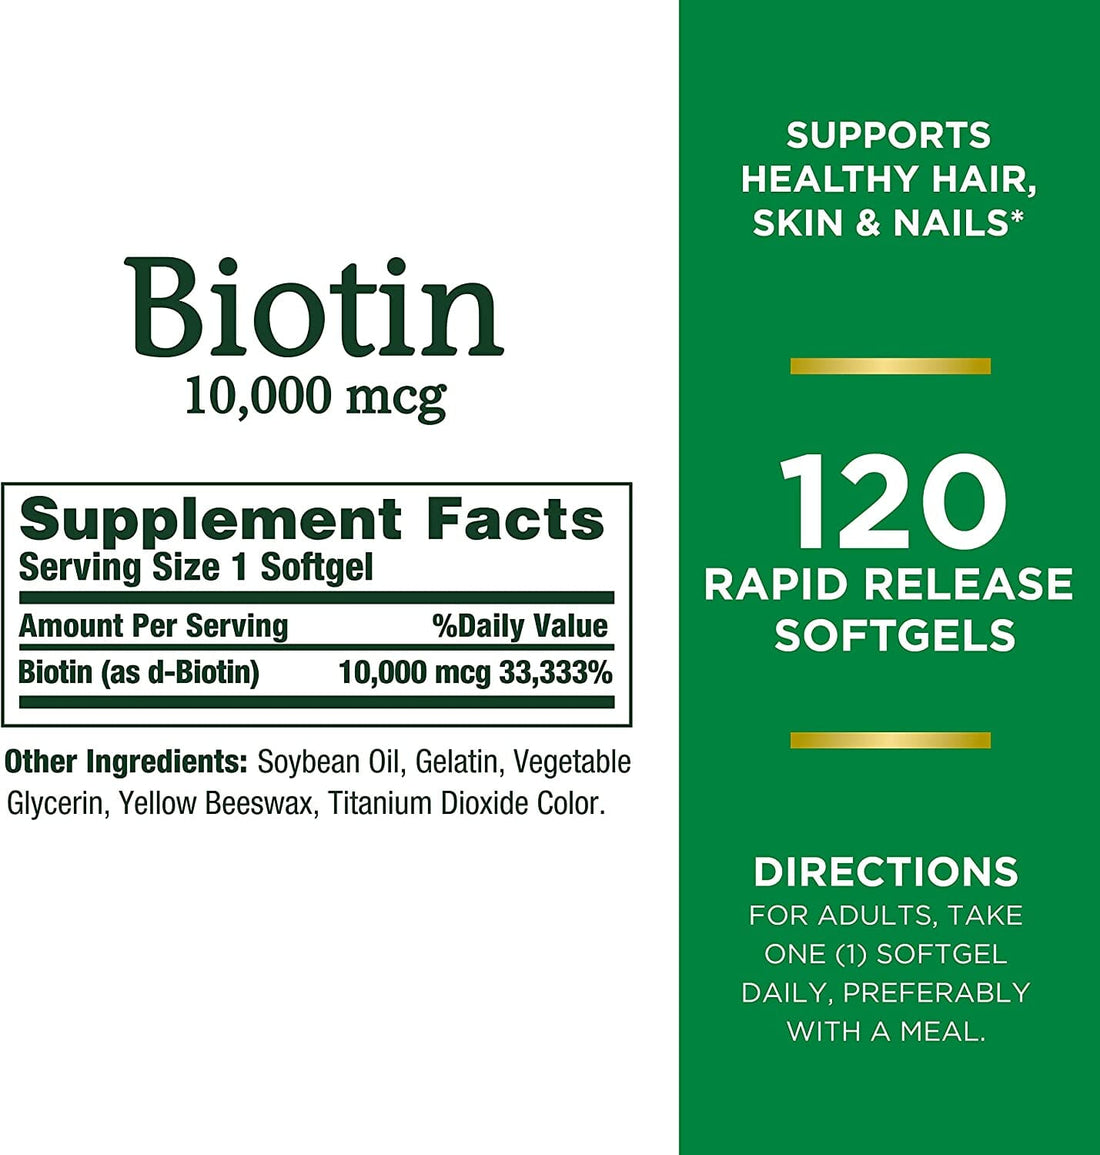 Nature’s Bounty Biotin, Supports Healthy Hair, Skin and Nails, 10,000 mcg, Rapid Release Softgels, 120 Ct Skin Care Nature’s Bounty ORION XO Sri Lanka